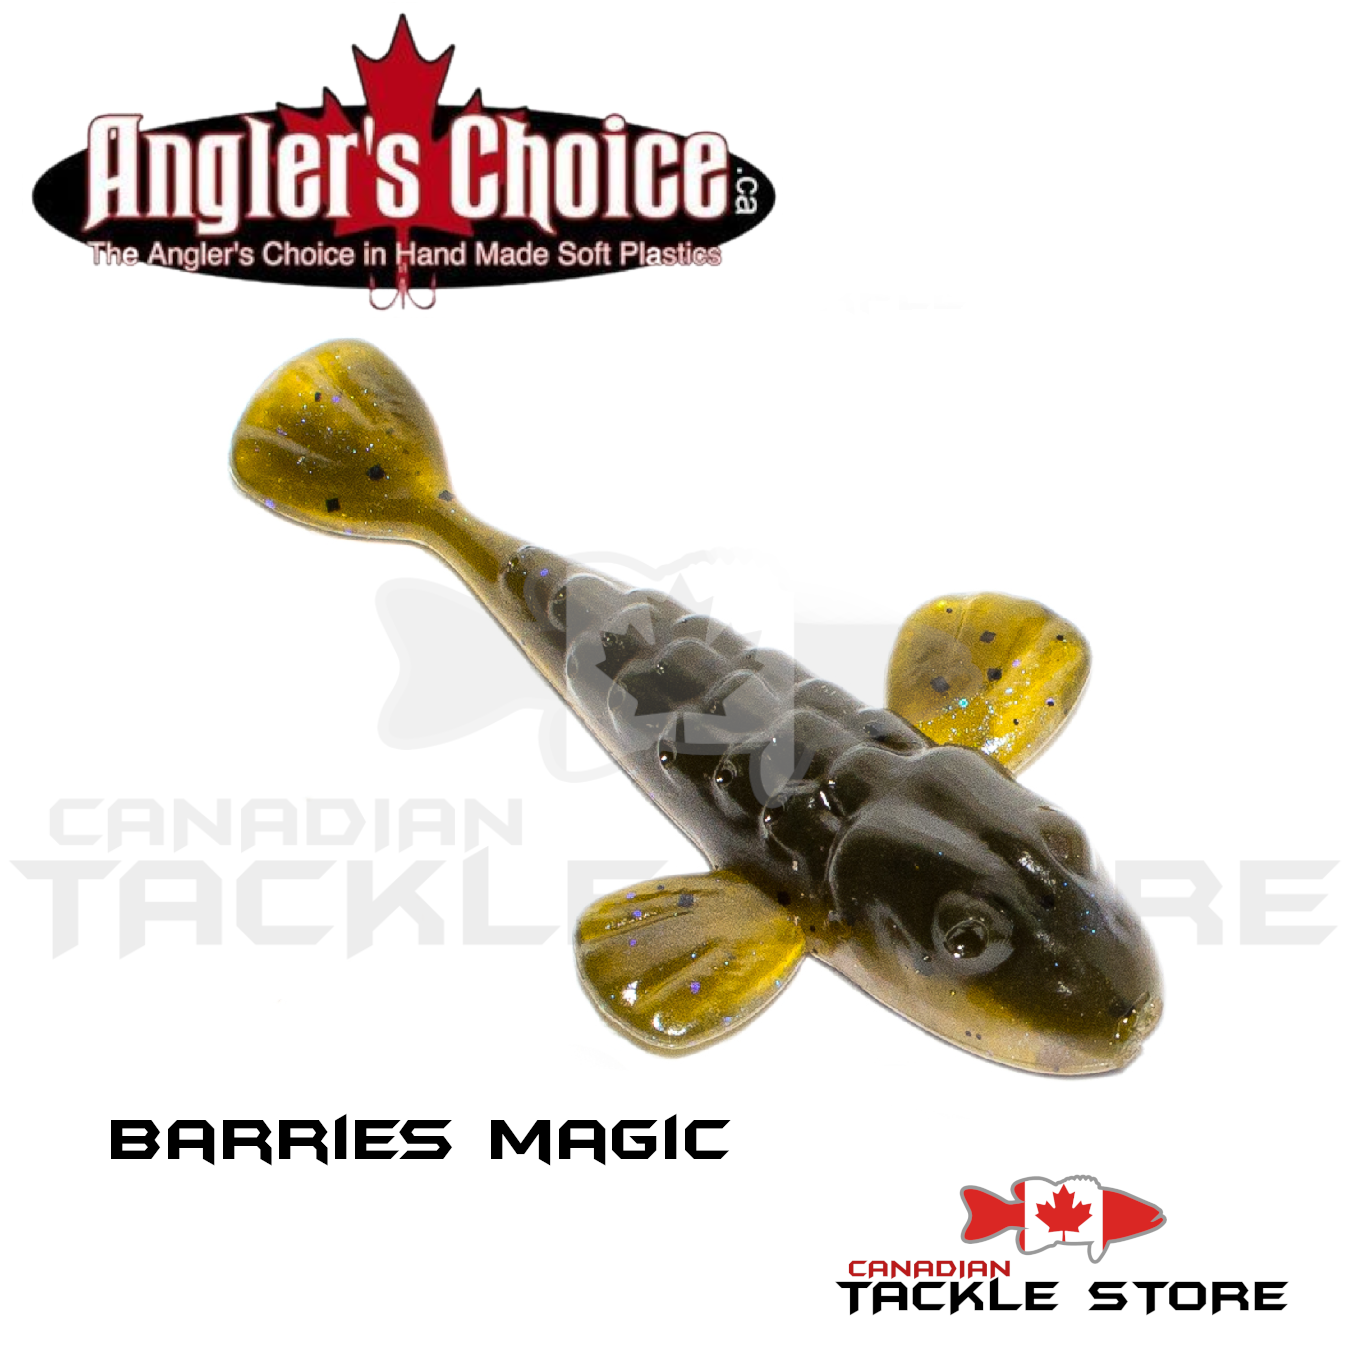 Angler's Choice Soft Plastics - Anyone else throw these anglerschoice  Ridgeback Gobies on a ned or dropshot? They are the real deal🔥 • • •  #bassfishing #fishing #bass #largemouthbass #catchandrelease #fish  #outdoors #